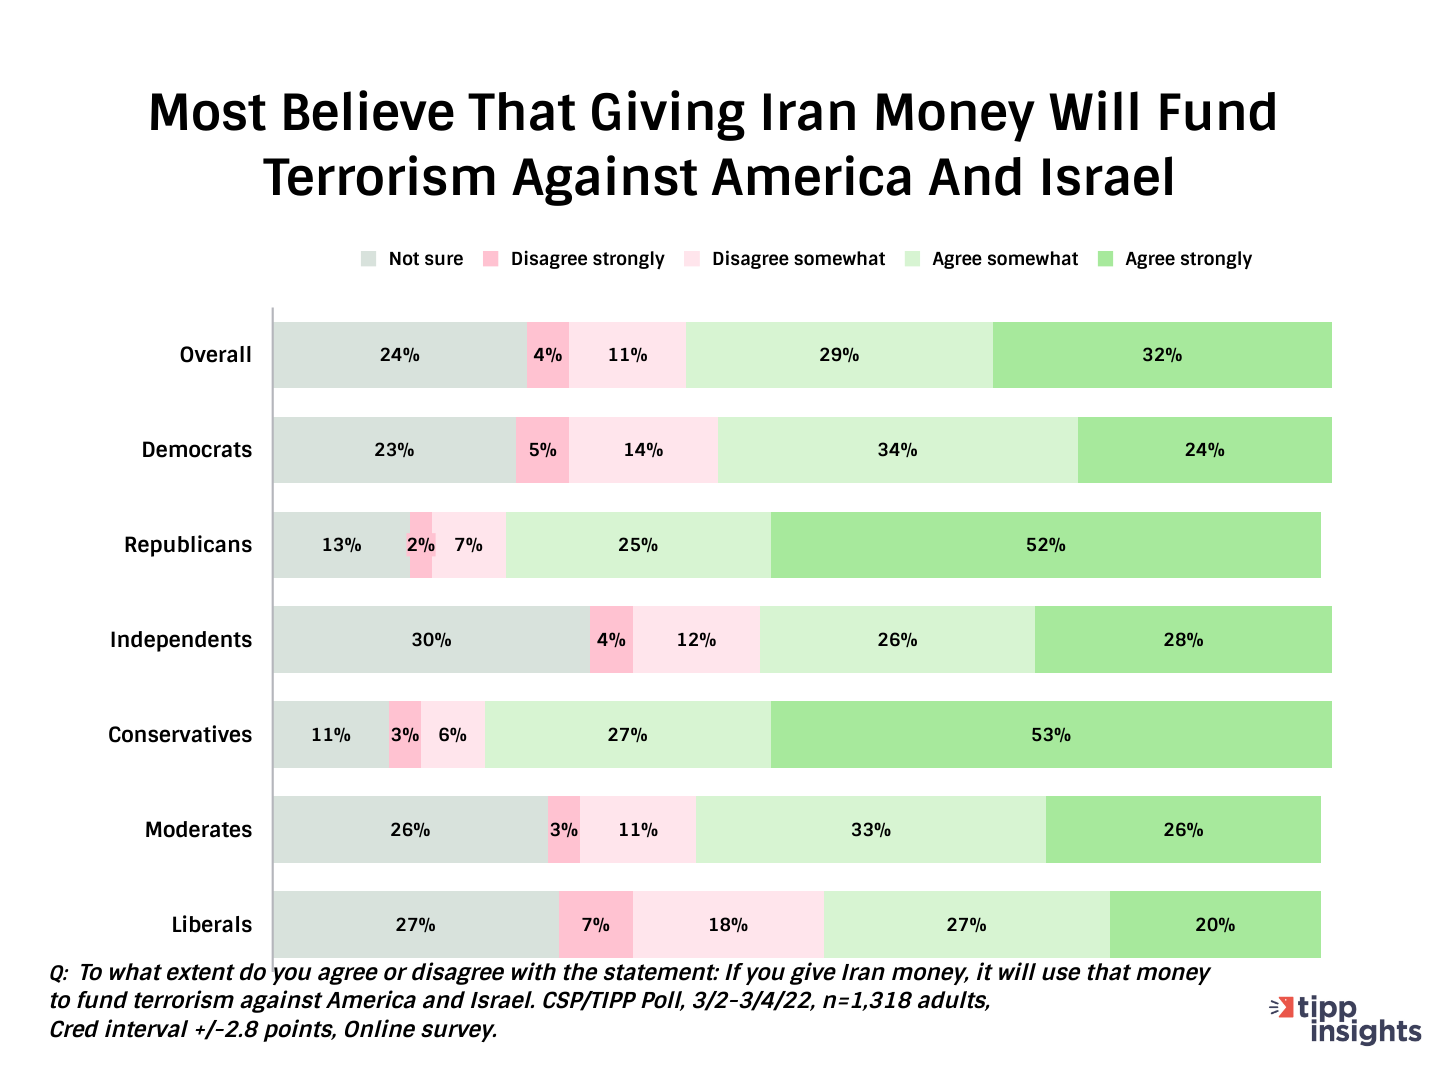 Most believe that giving Iran money will fund terrorism against America and Israel